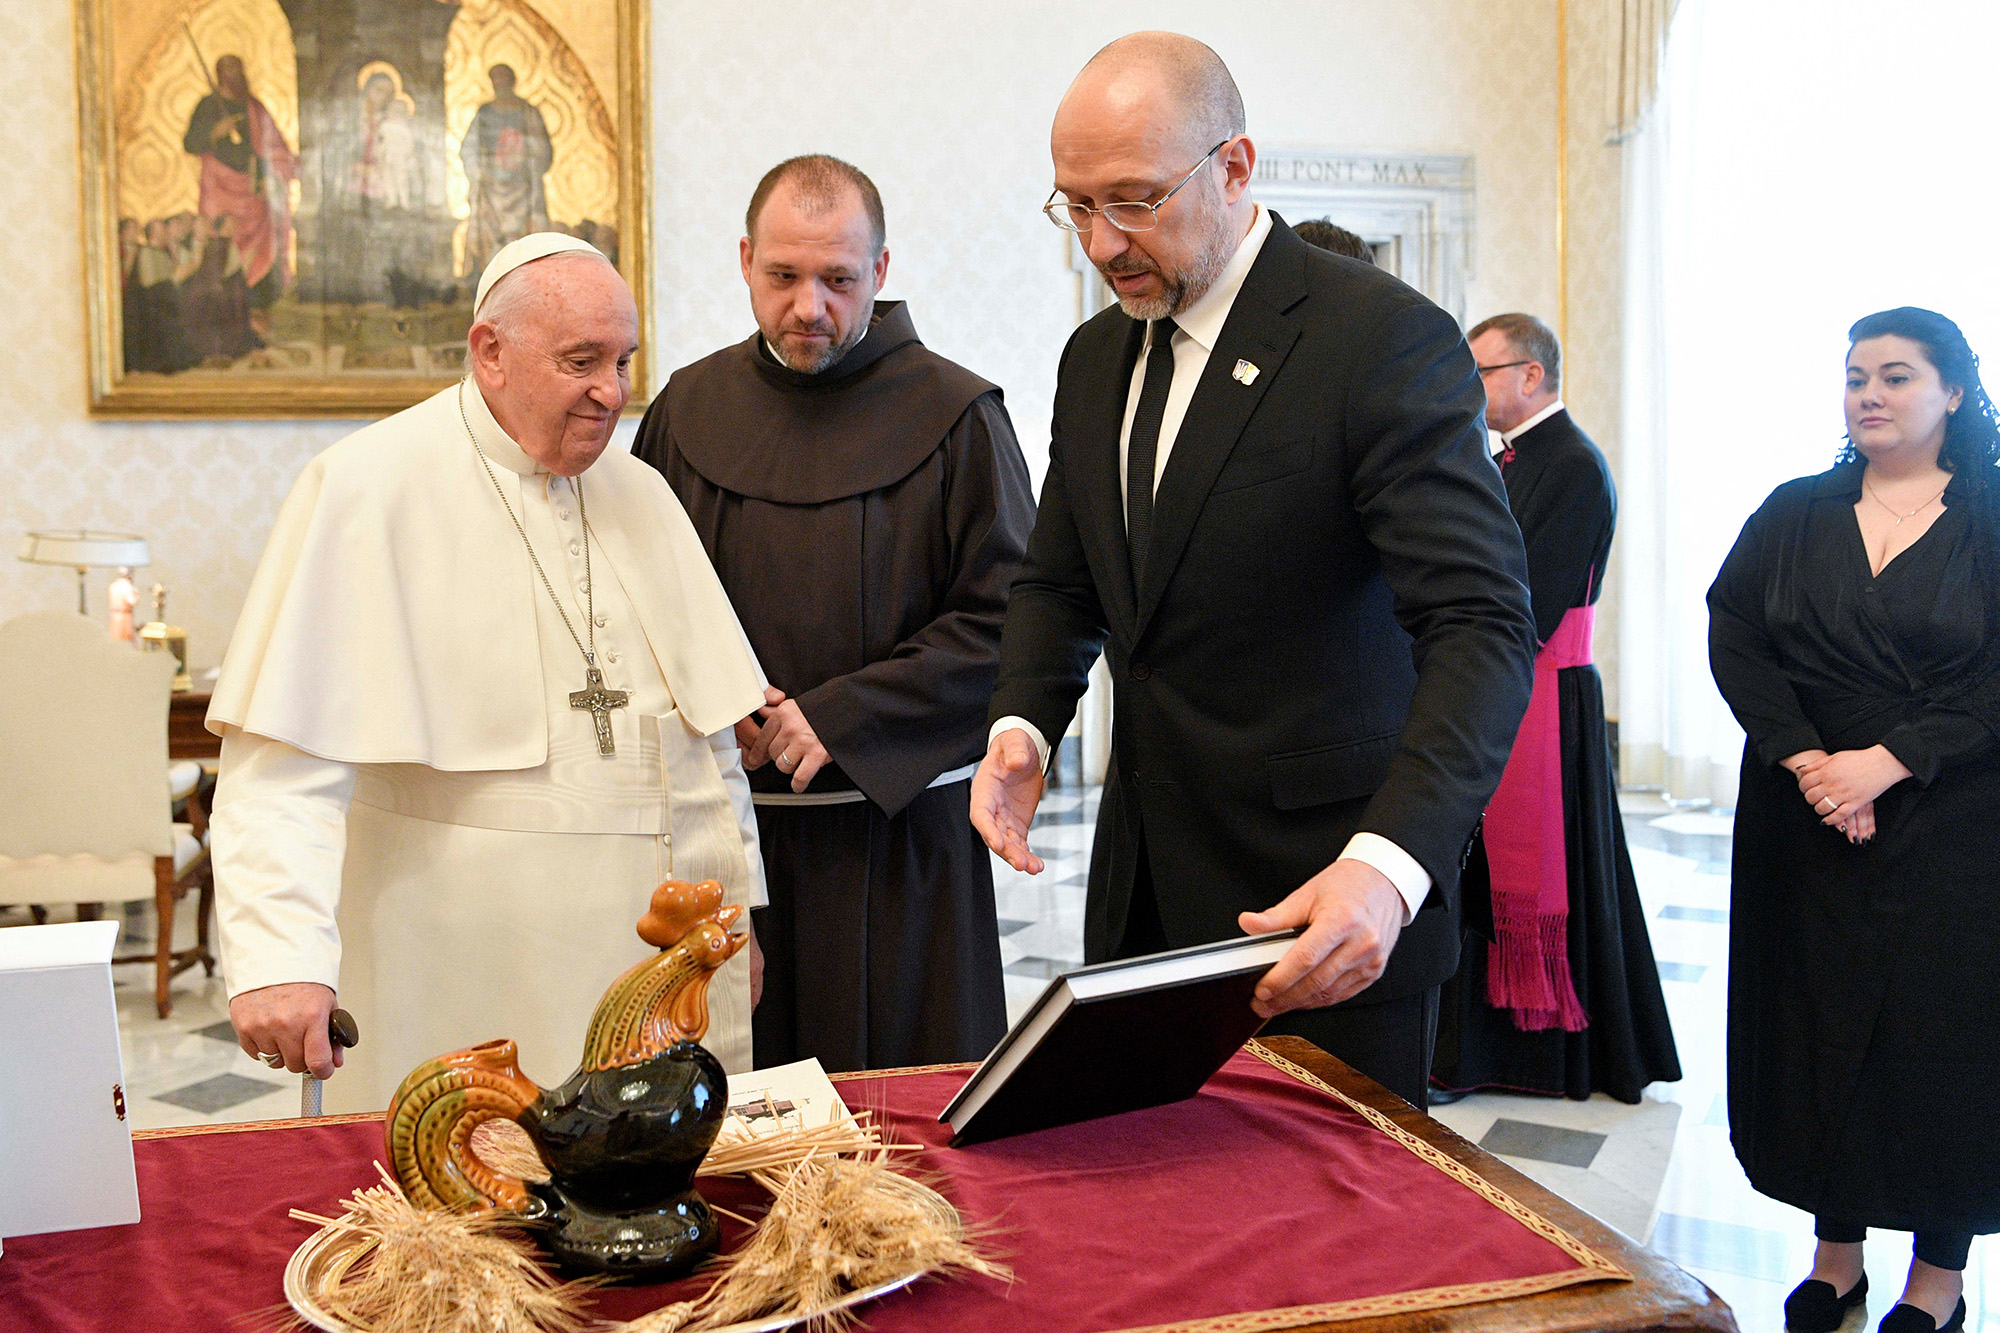 Pope Francis, left, meets with Ukrainian Prime Minister Denys Shmyhal during their meeting at the Vatican on April 27.